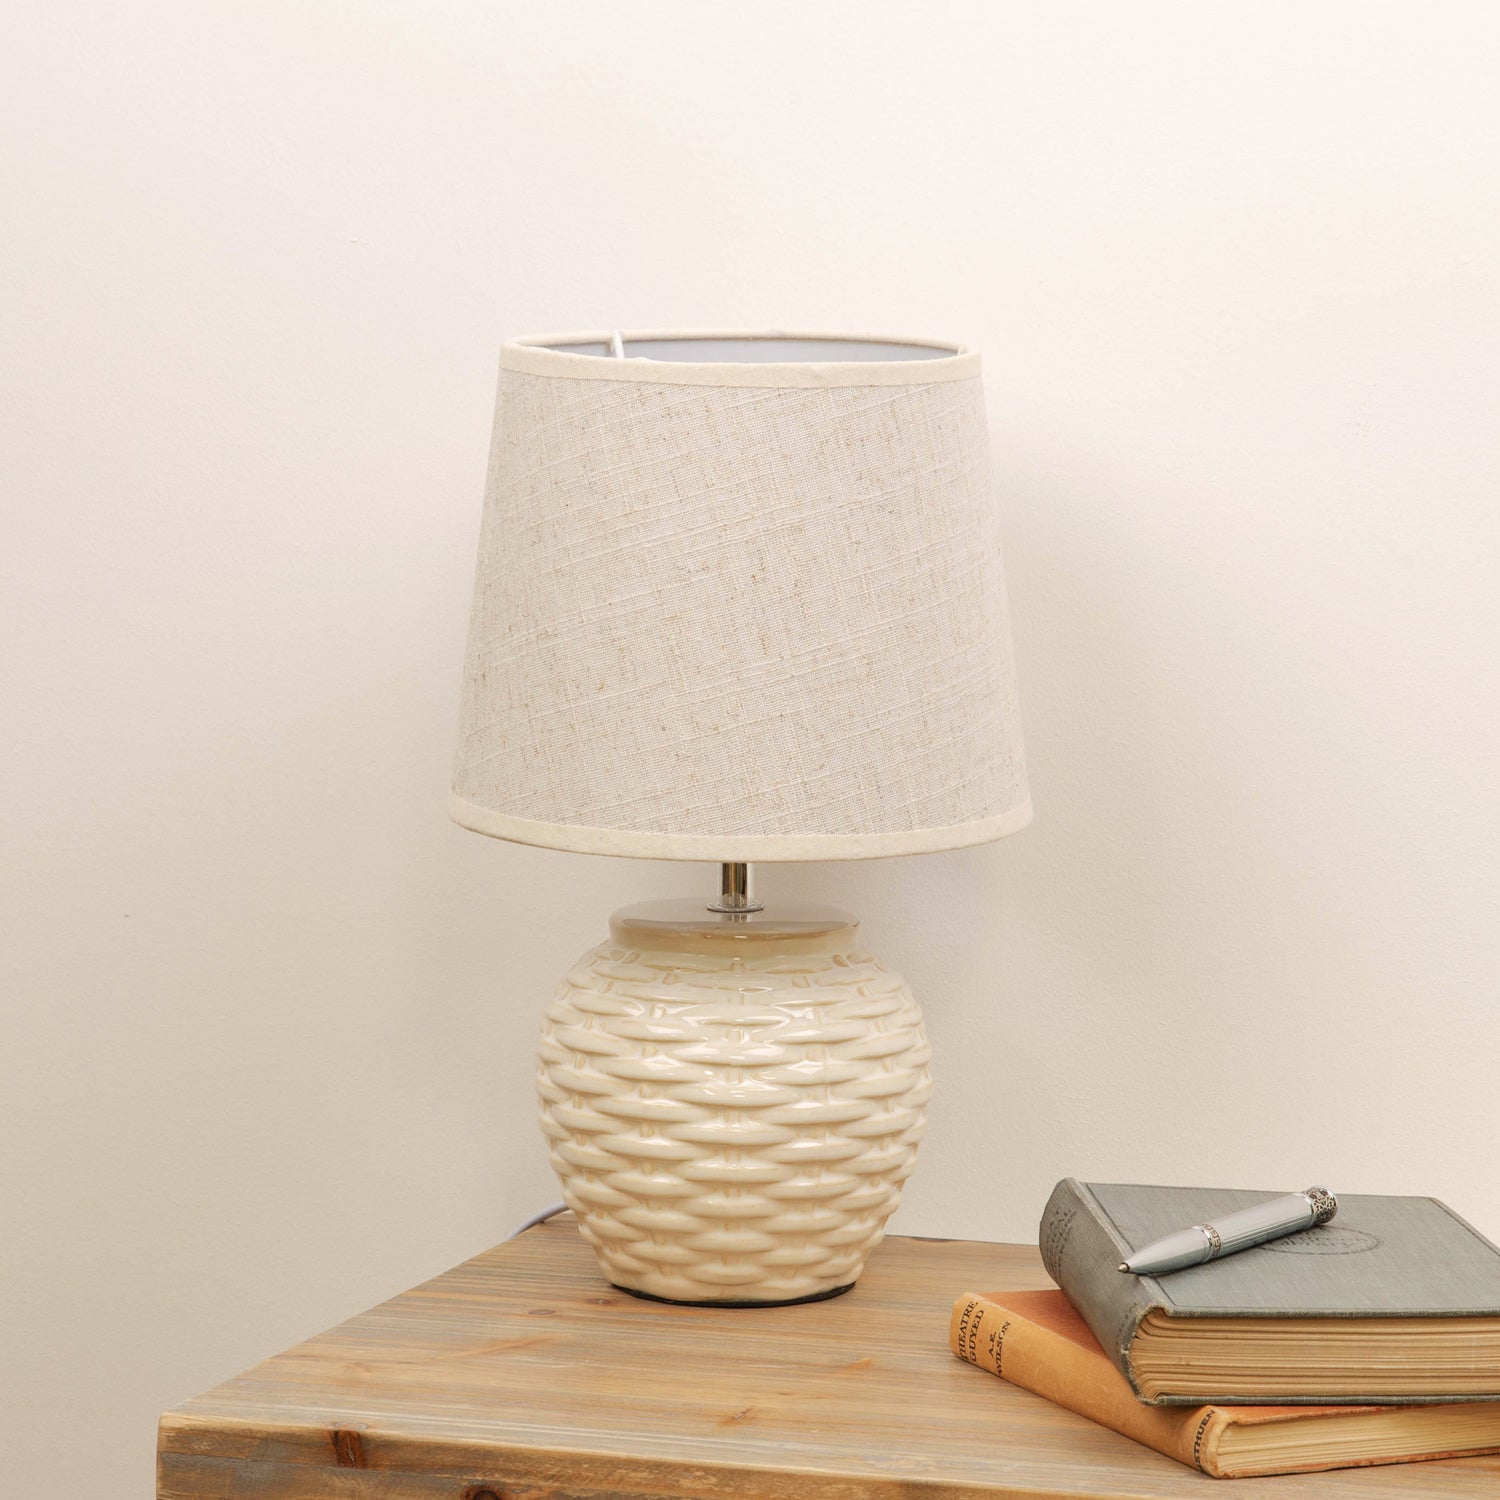 Basket Weave Table Lamp with Beige Linen Shade - 33cm